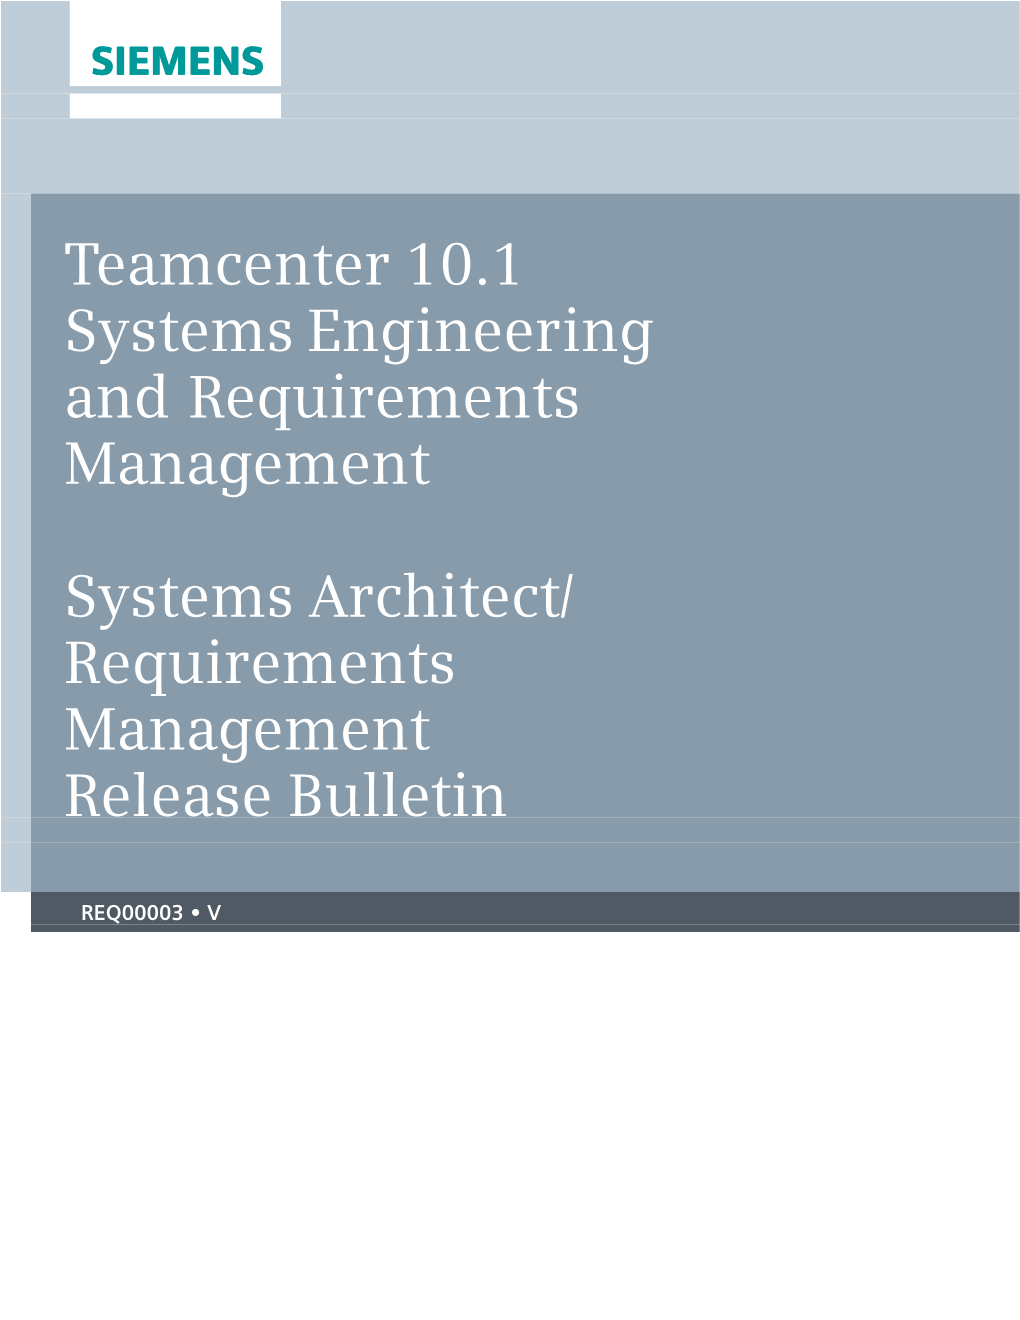 Systems Architect/Requirements Management Release Bulletin